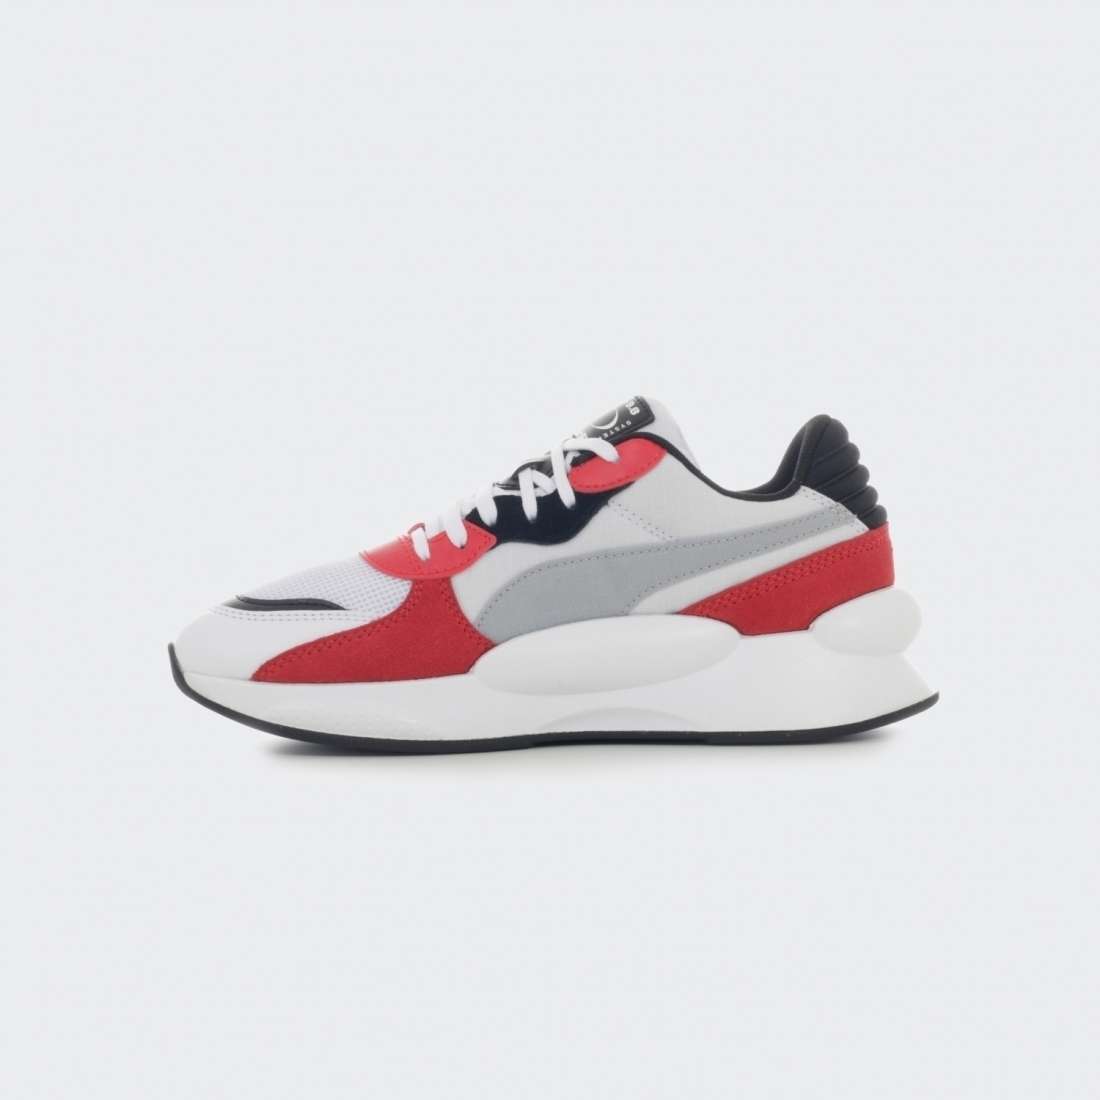 PUMA RS 9.8 SPACE WHITE/RED